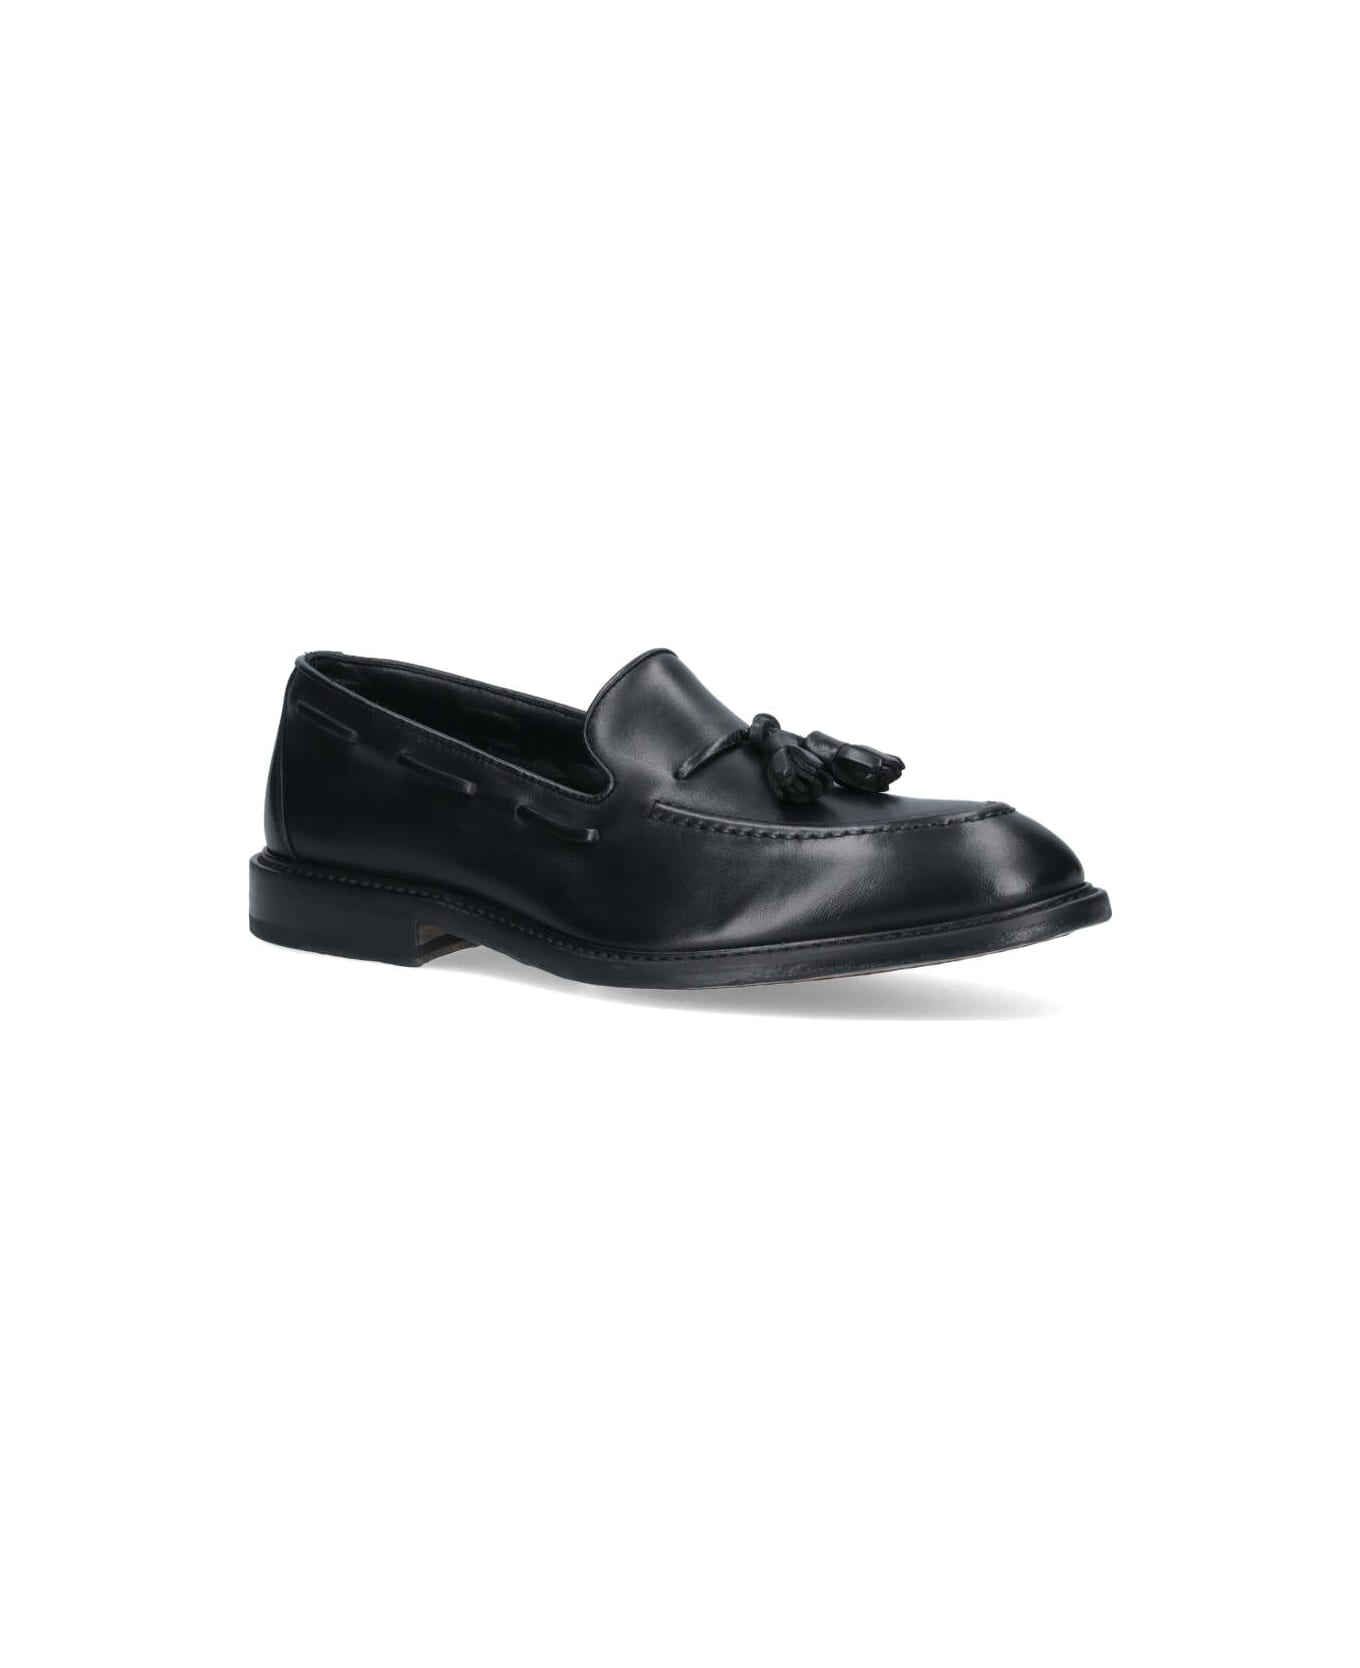 Alexander Hotto 'loafer' Loafers - Black   ローファー＆デッキシューズ